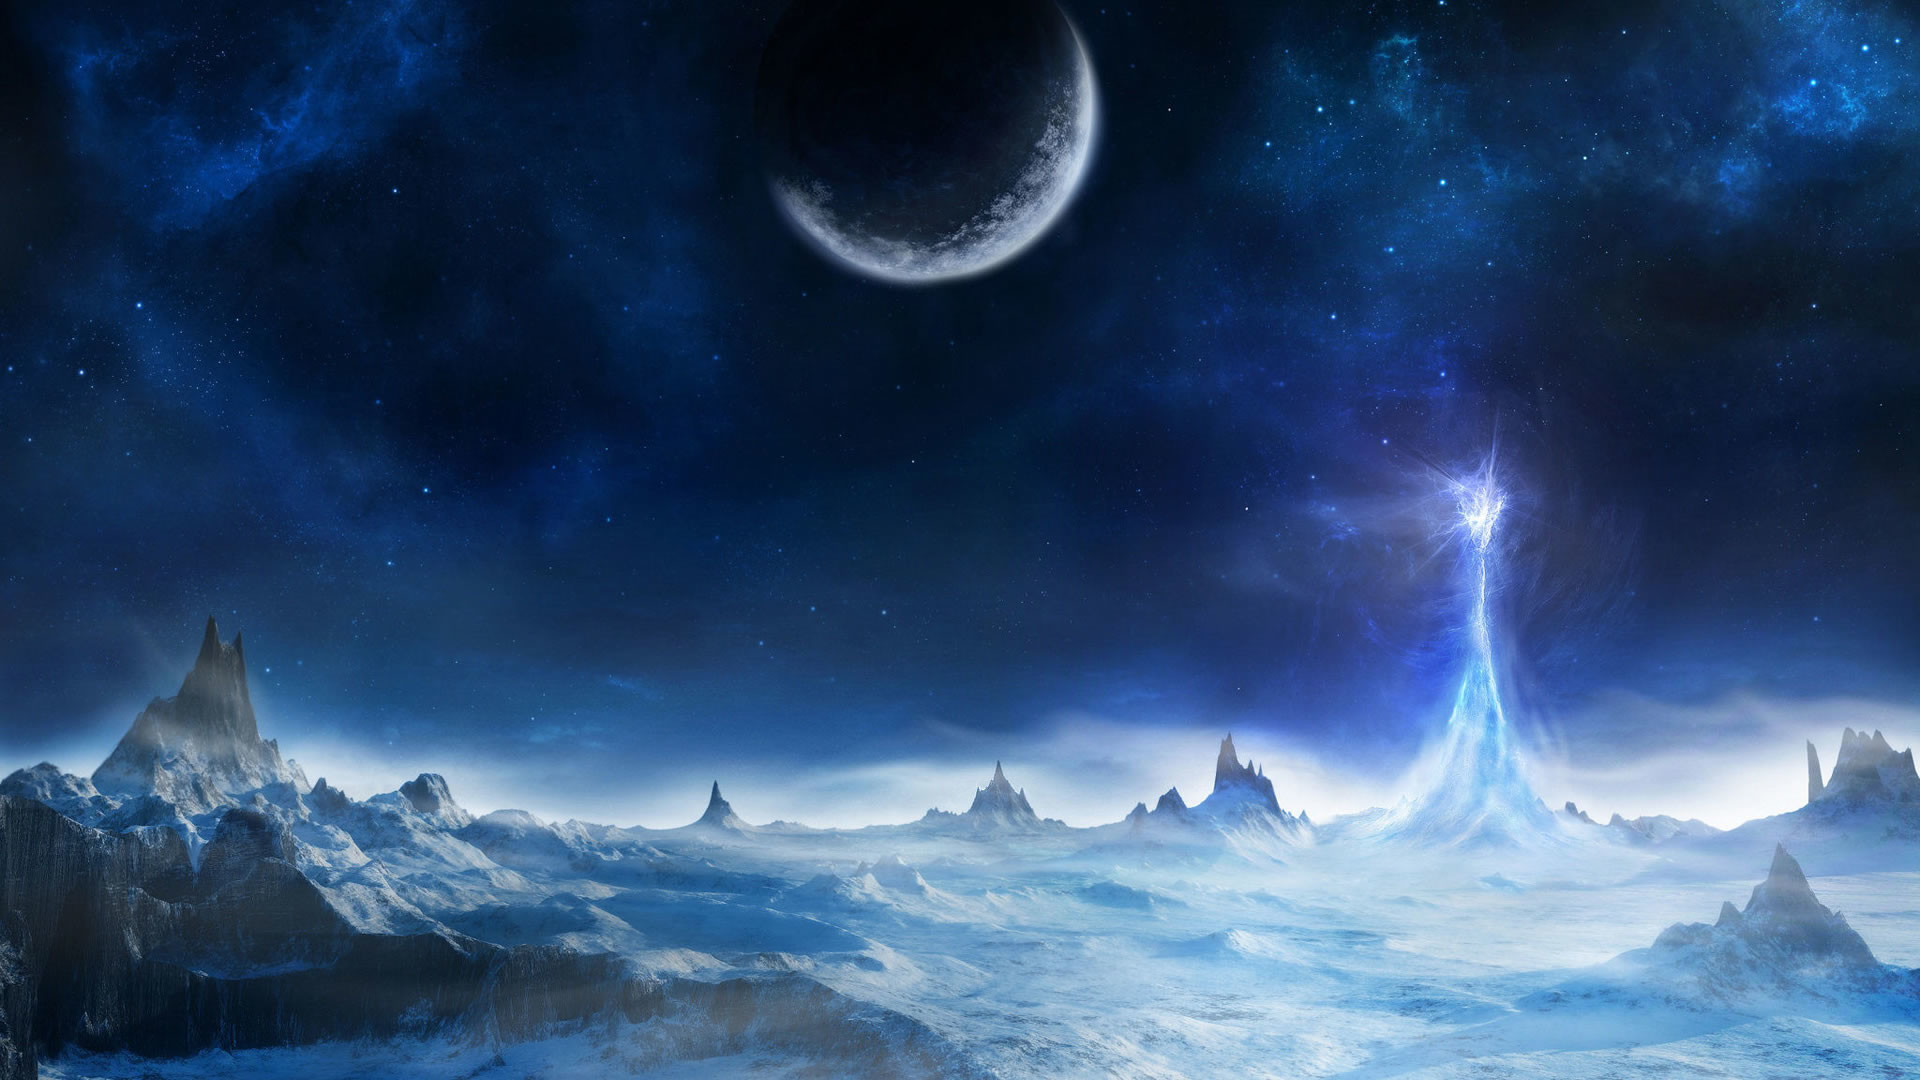 Cool Fantasy Wallpapers 38458 1920x1080